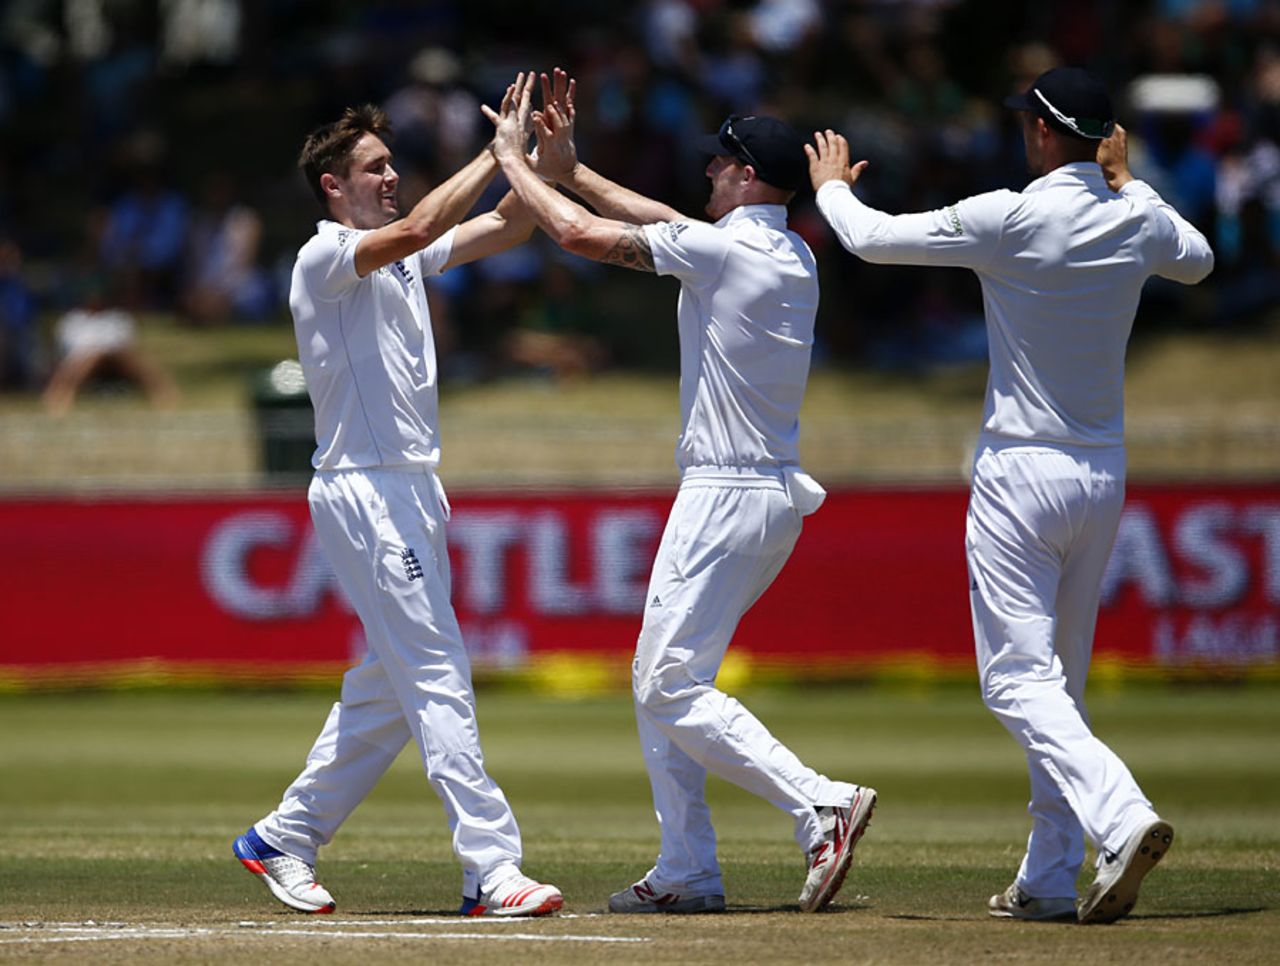 Chris Woakes claimed his first wicket of the match when he removed Dane Piedt, South Africa v England, 1st Test, Durban, 5th day, December 30, 2015